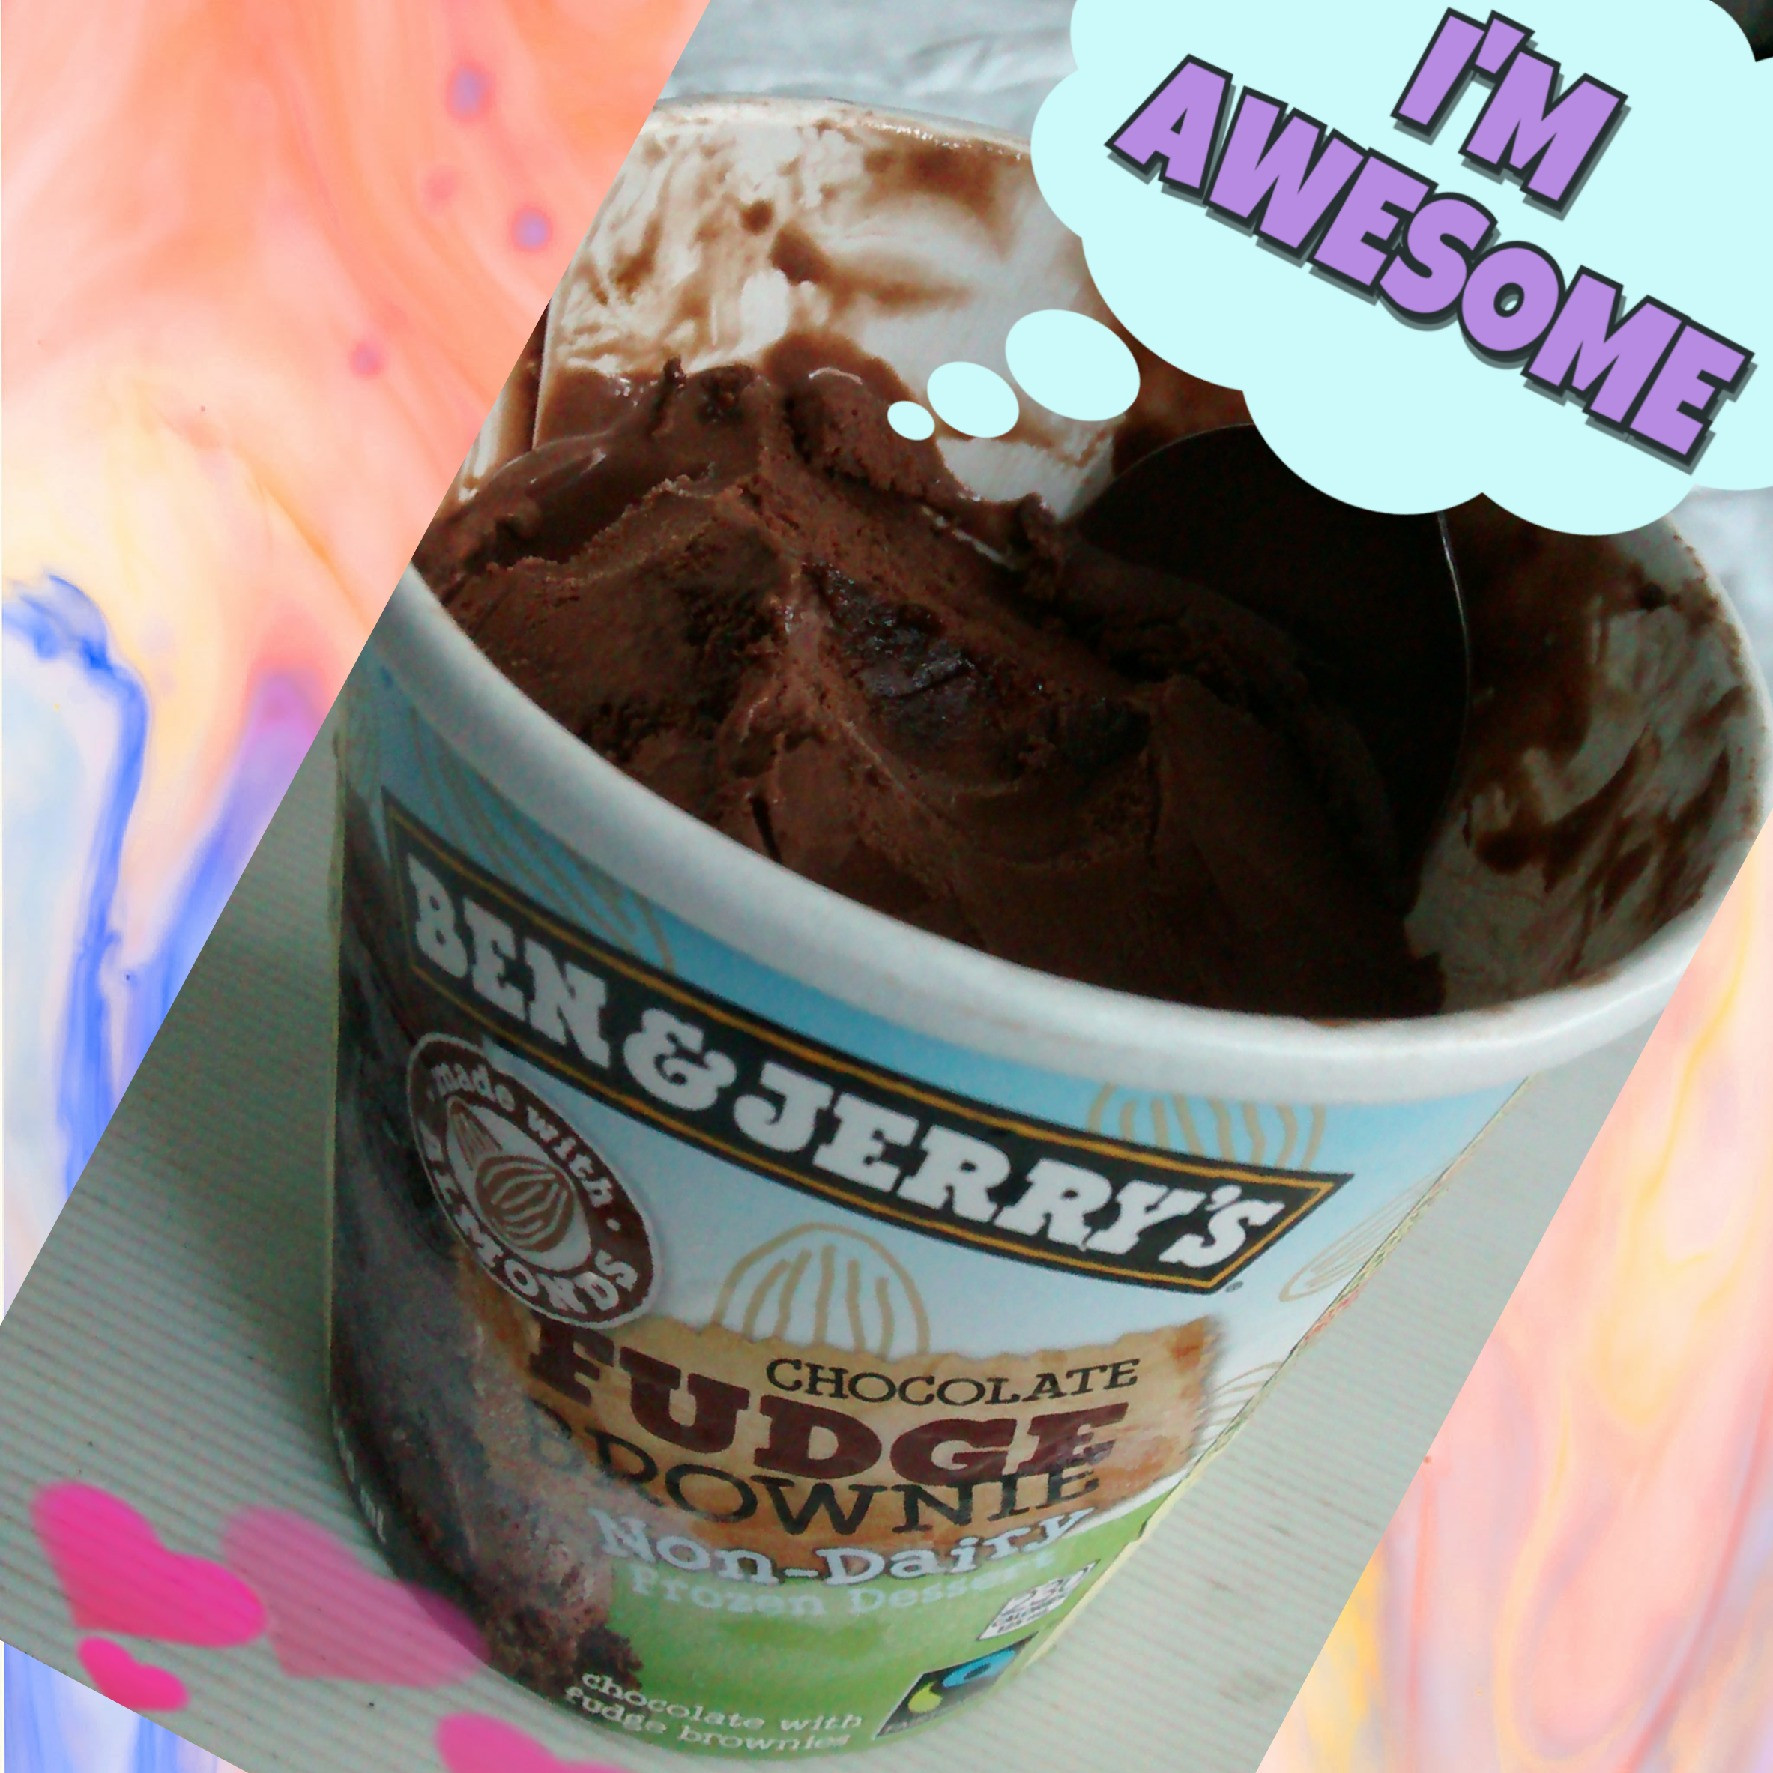 Non Dairy Brownies
 Ben & Jerry’s Non Dairy Chocolate Fudge Brownie reviews